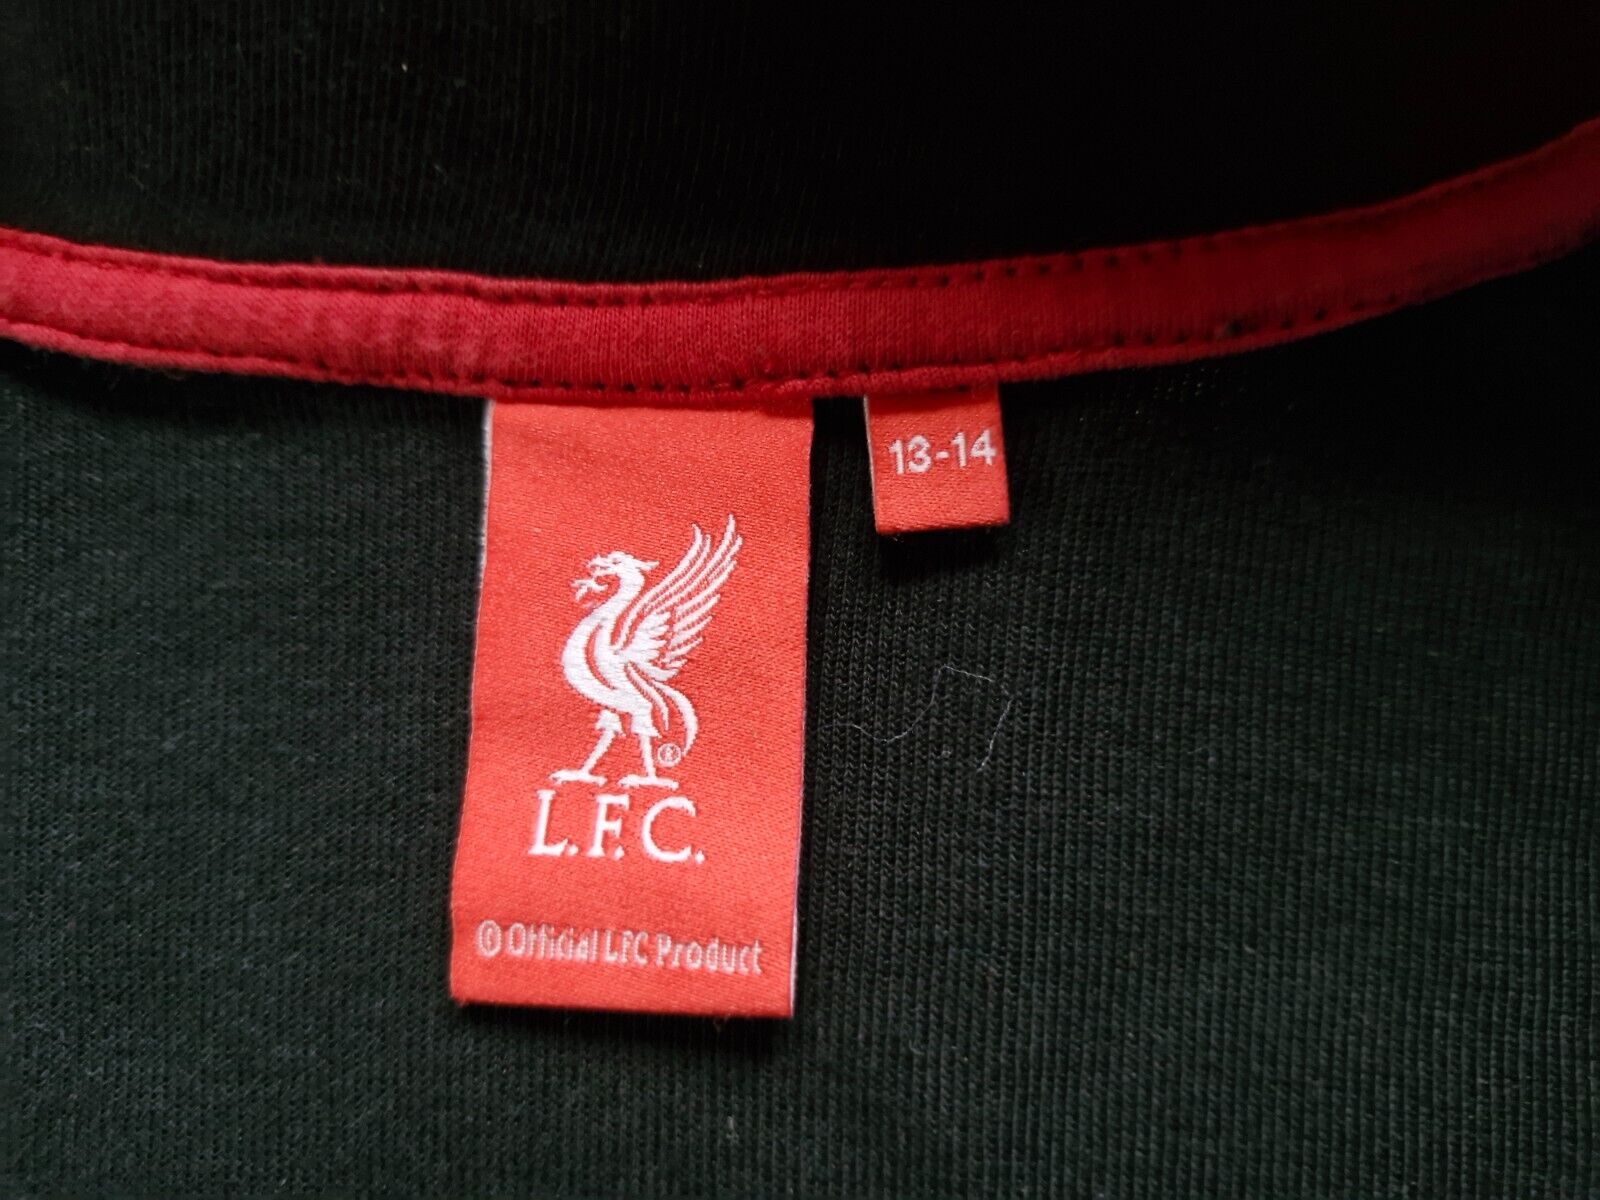 Boys GEORGE LFC Track Top Size 13-14 Years Black Red Zip Liverpool ...